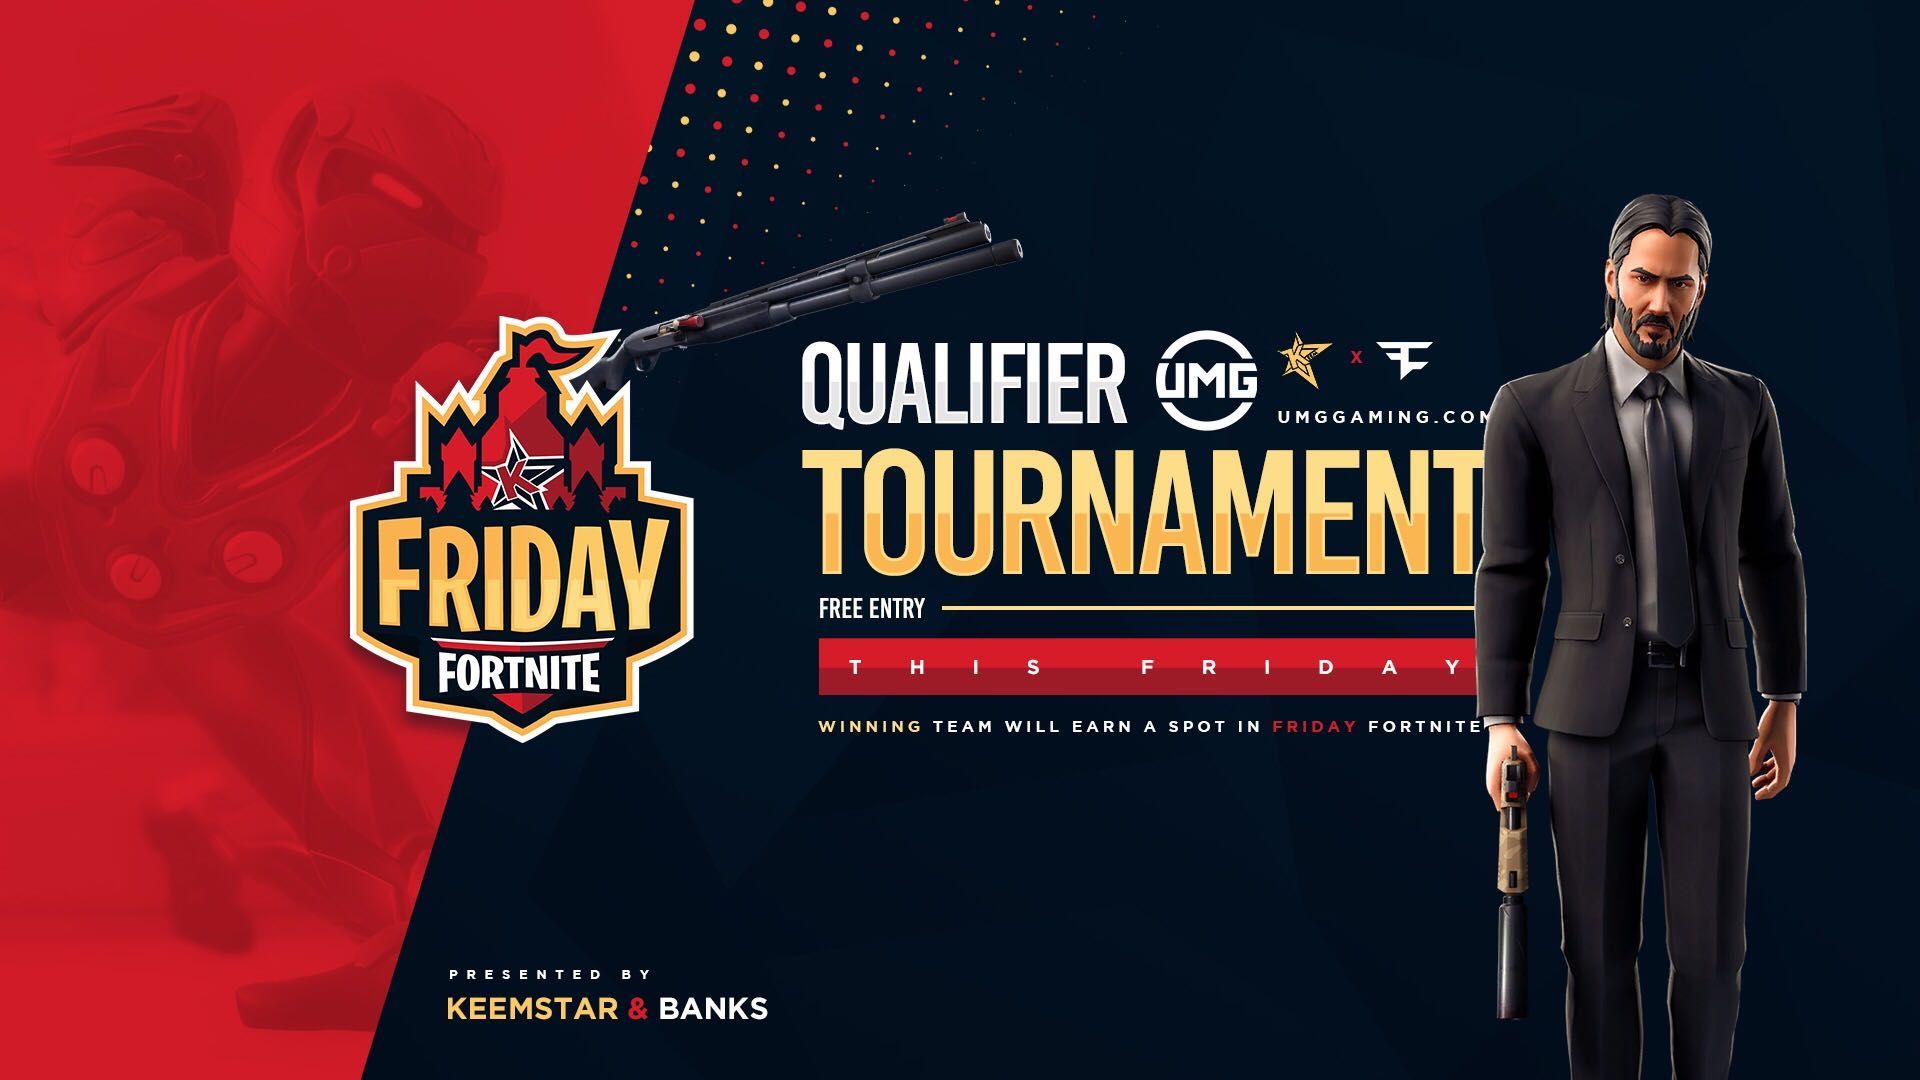 Friday Fortnite Time Friday Fortnite Qualifiers Time Bracket Teams Standings How To Watch